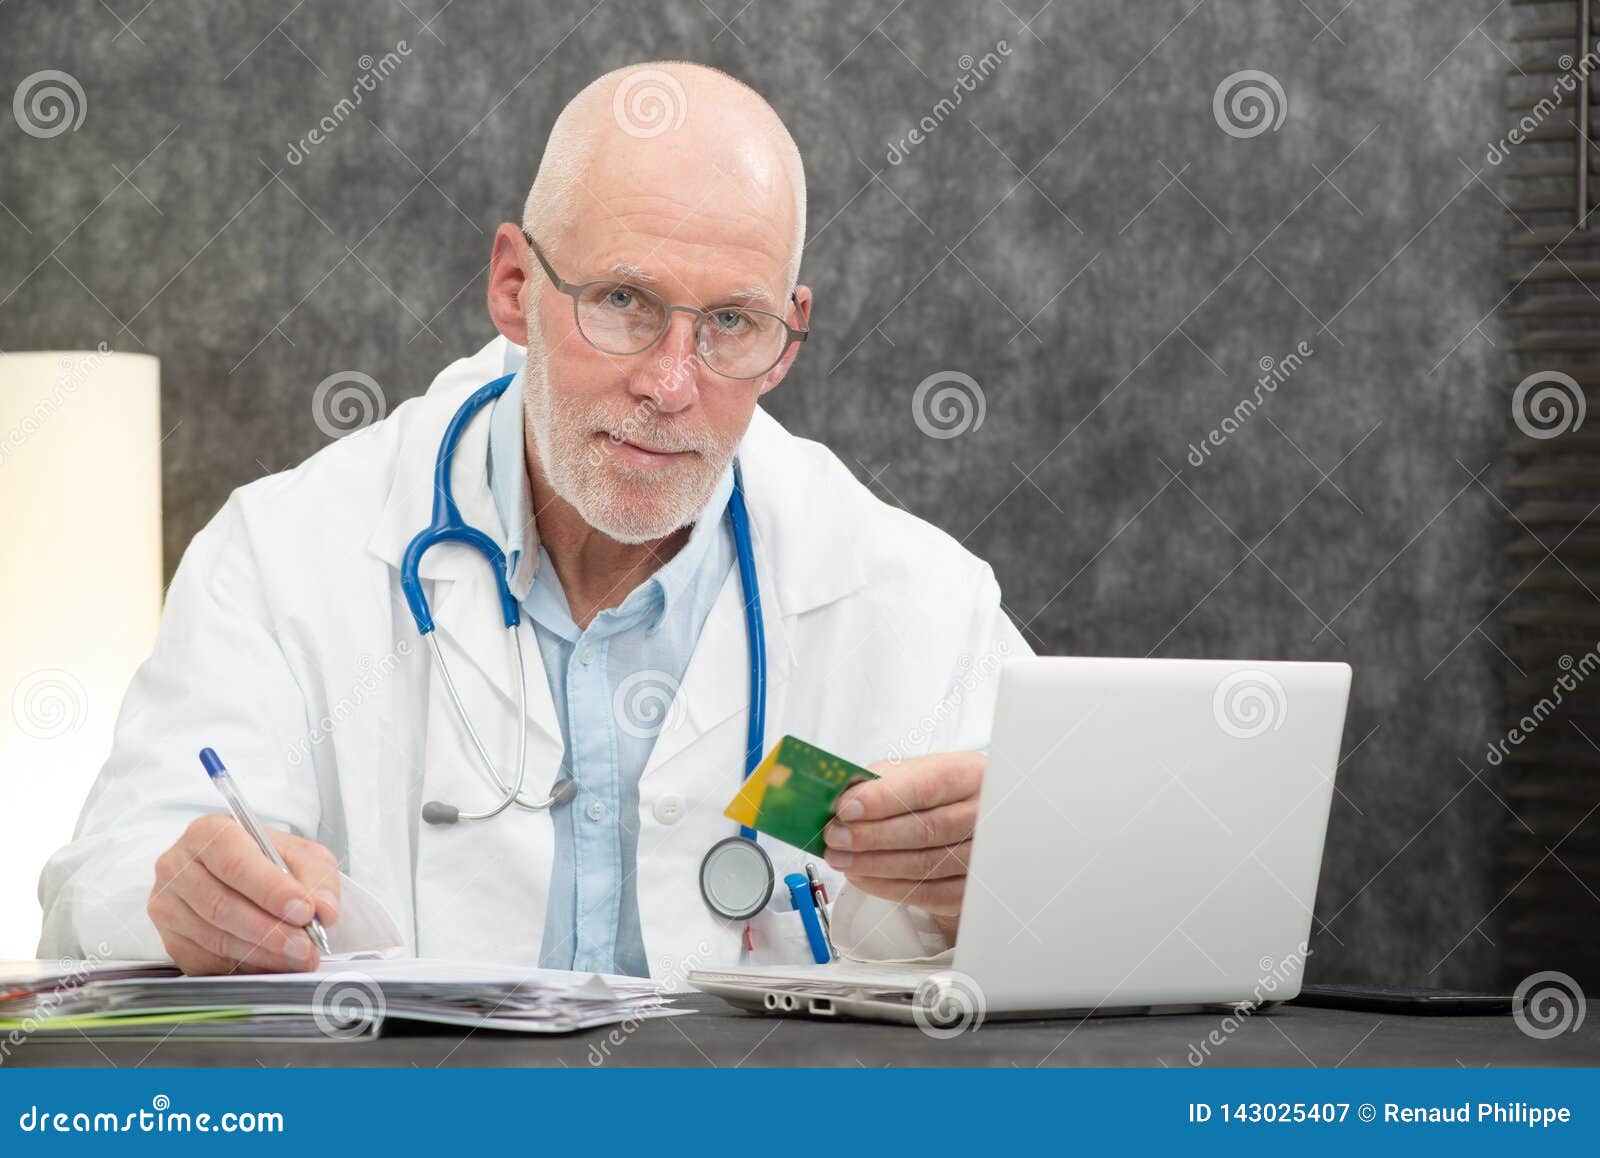 Senior Bearded Doctor with Health Insurance Card Stock Image - Image of ...